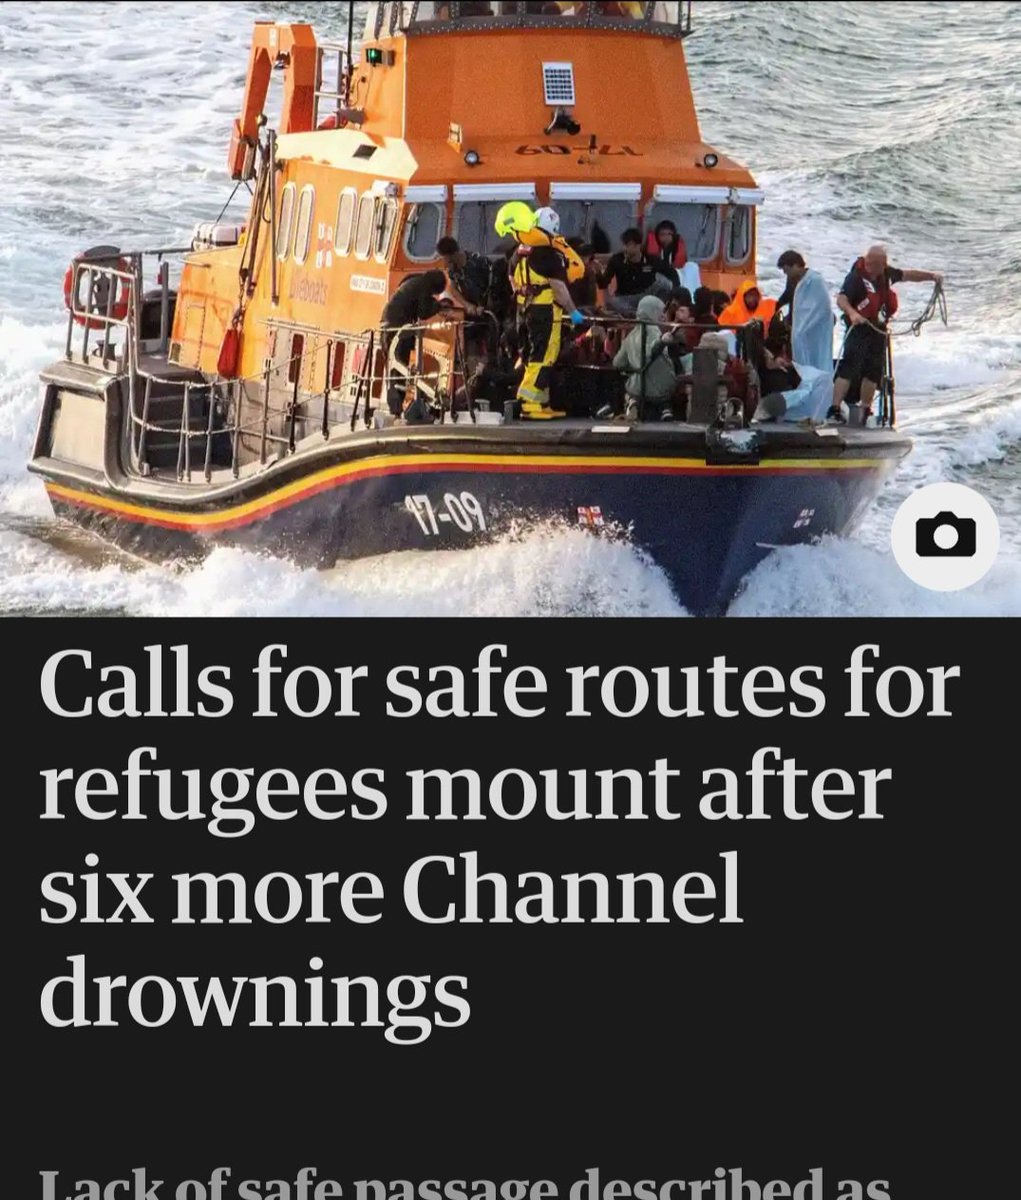 How to solve the challenge of unsafe small boats: 1. Create safe routes so people can apply for asylum outside the UK. (The current UKRS is not functioning properly.) 2. Crack down on people smugglers 3. Use the aid budget as intended, to help countries escape poverty.